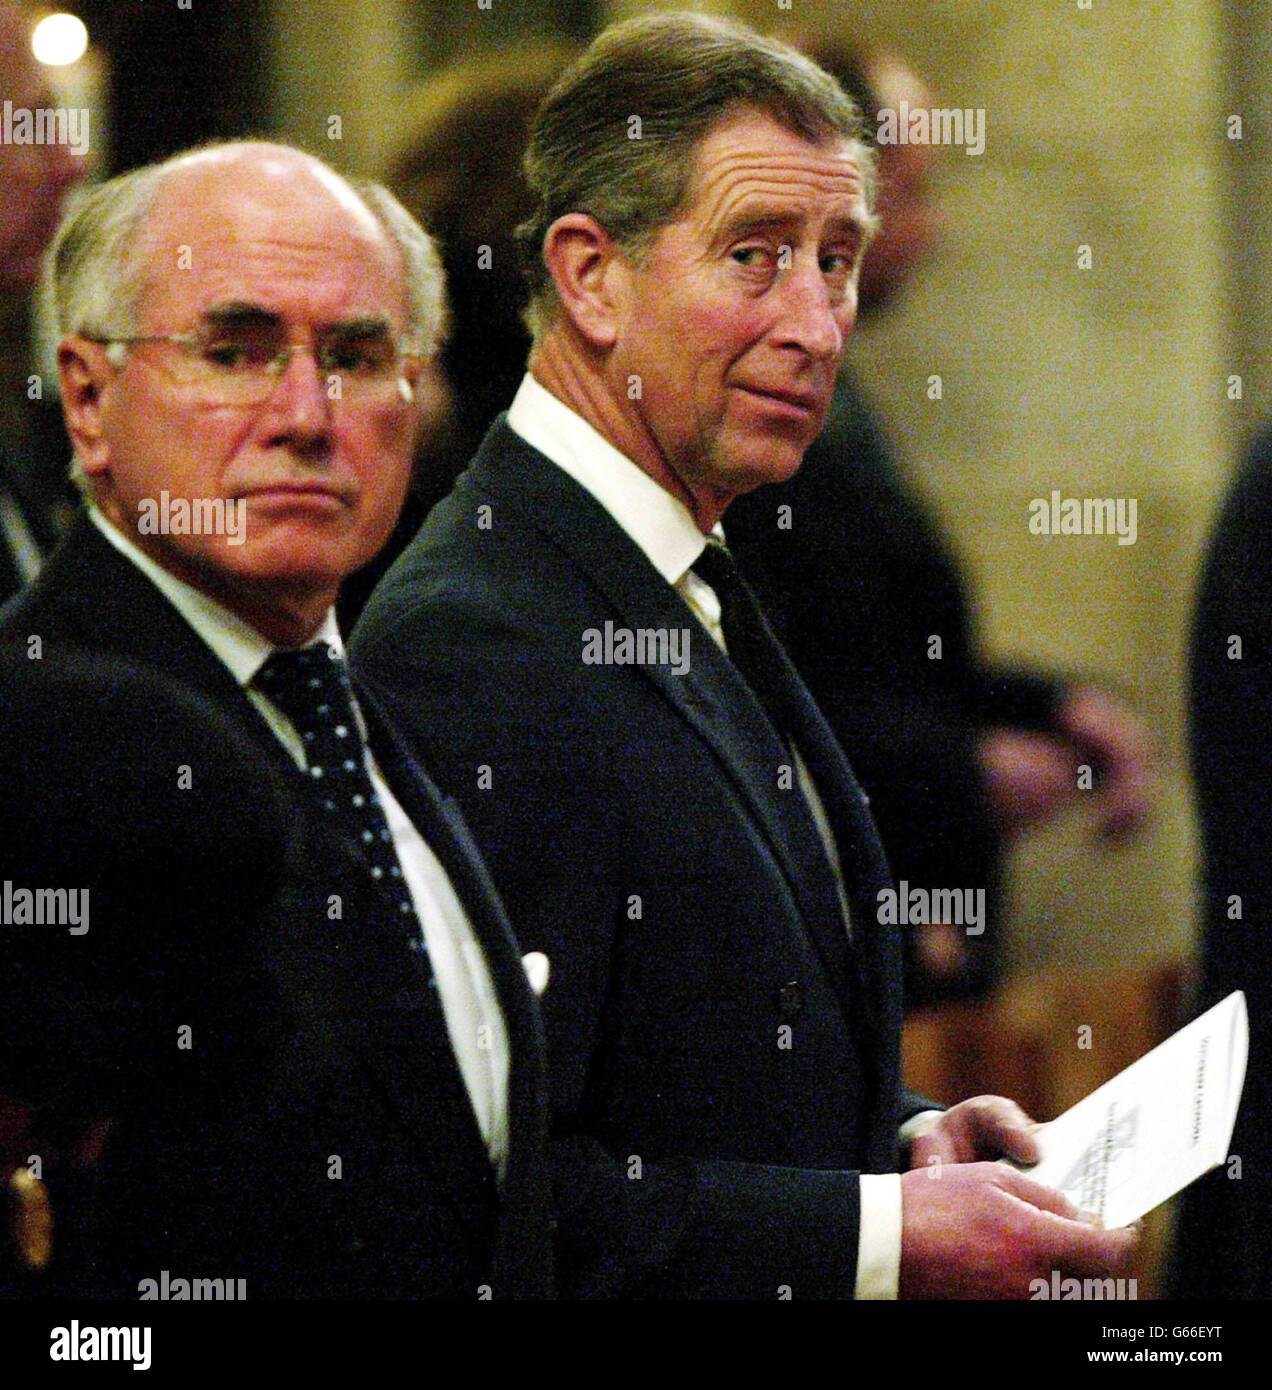 Australian Prime Minister John Howard and Britain's Prince Charles attend a Service of Commemoration for the victims of the Bali bombings on October 12, 2002 at Southwark Cathedral, London. * . At least 180 people died and scores were injured in the blasts which tore through the popular Sari club and Paddy's Bar in the Indonesian island resort Kuta exactly four months ago. Stock Photo